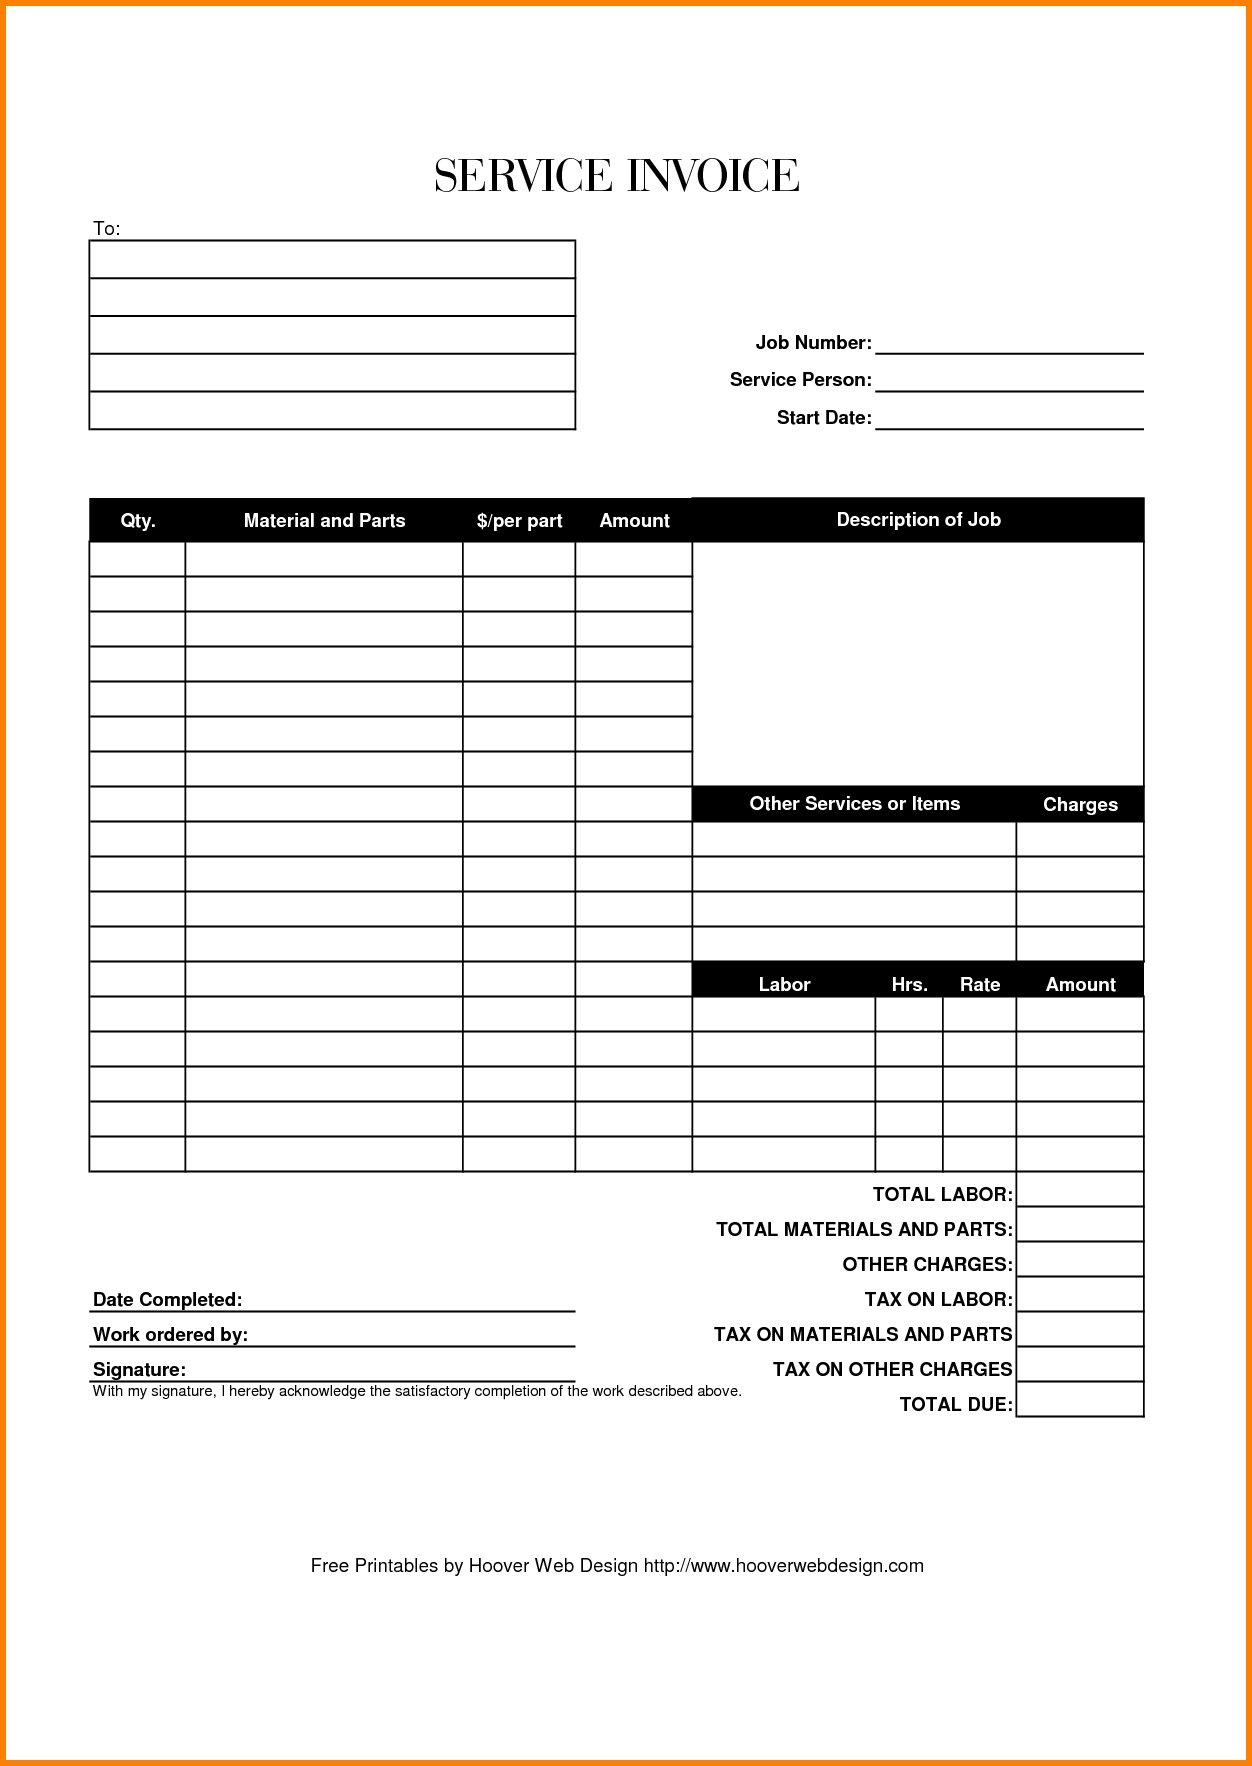 8 invoice forms printable short paid invoice invoice forms printable